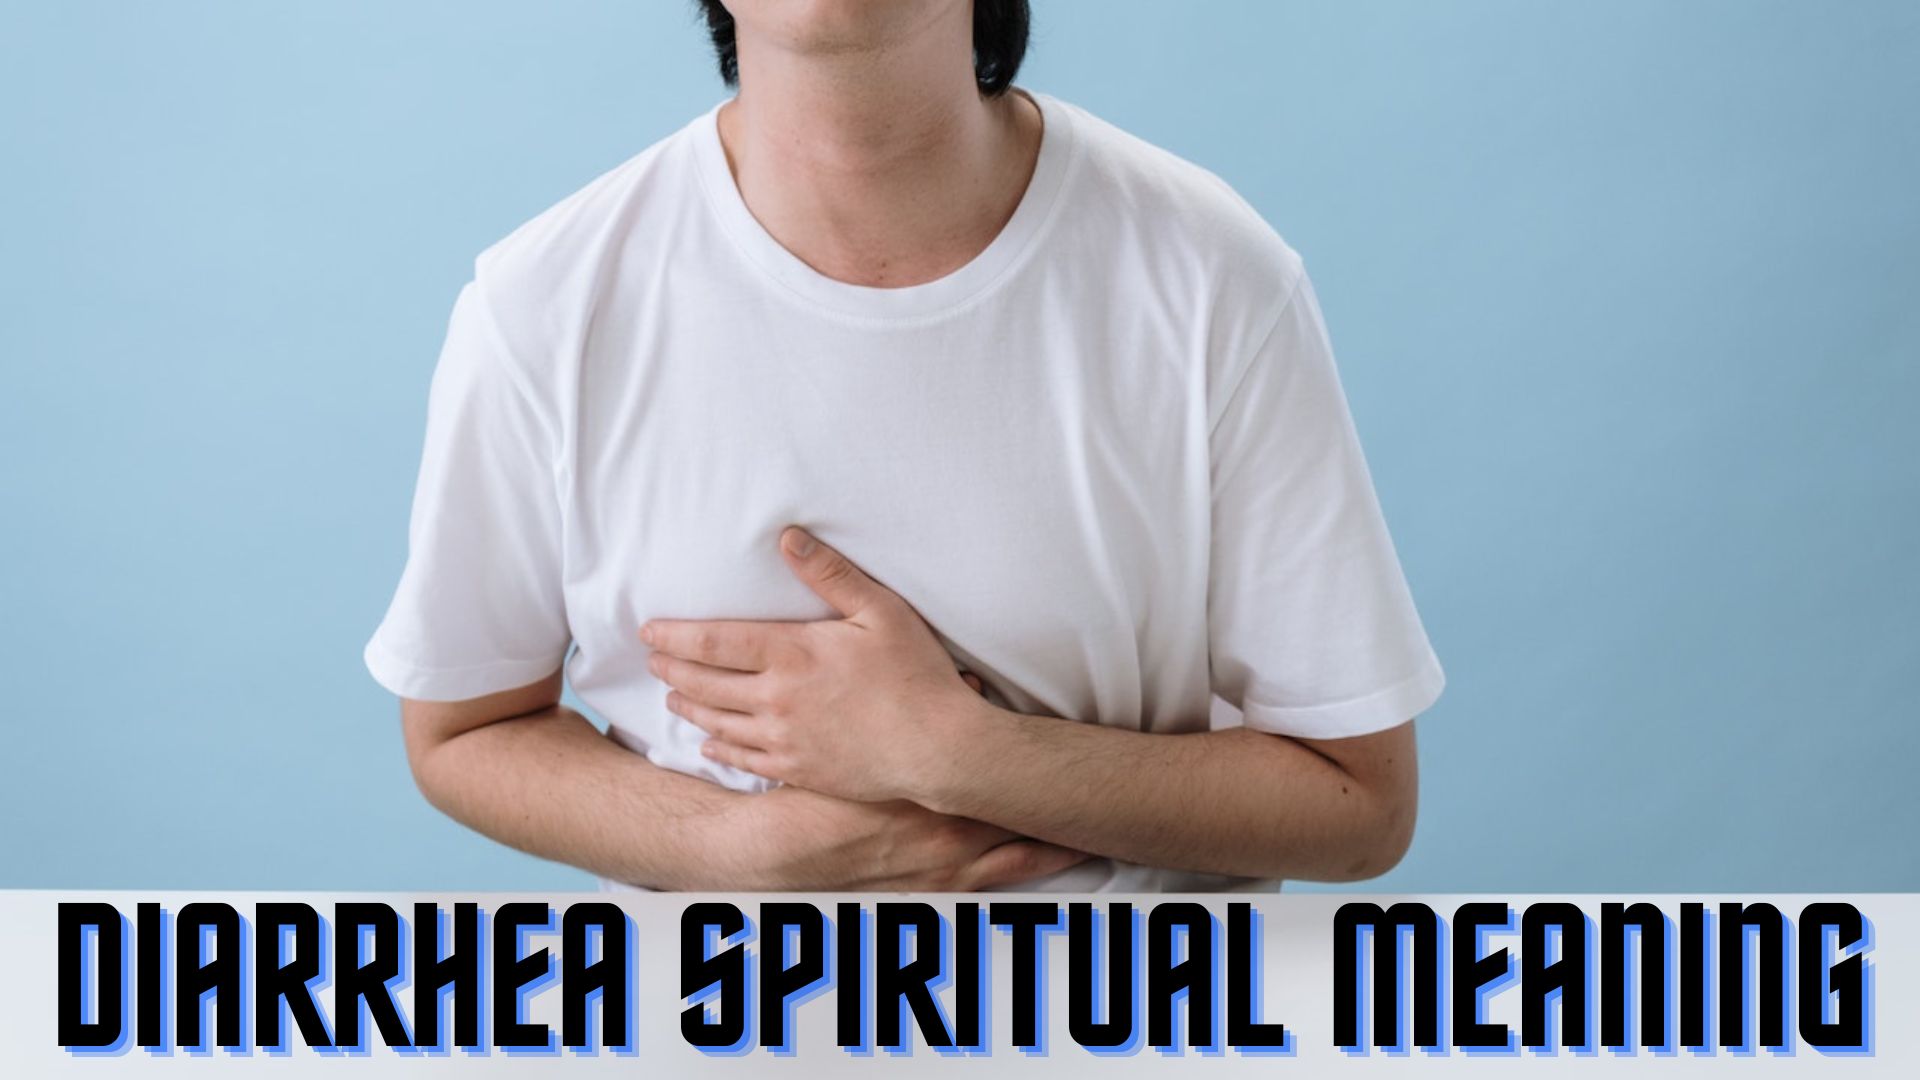 Diarrhea Spiritual Meaning - A Sign That You Do Not Recognize Your Environment